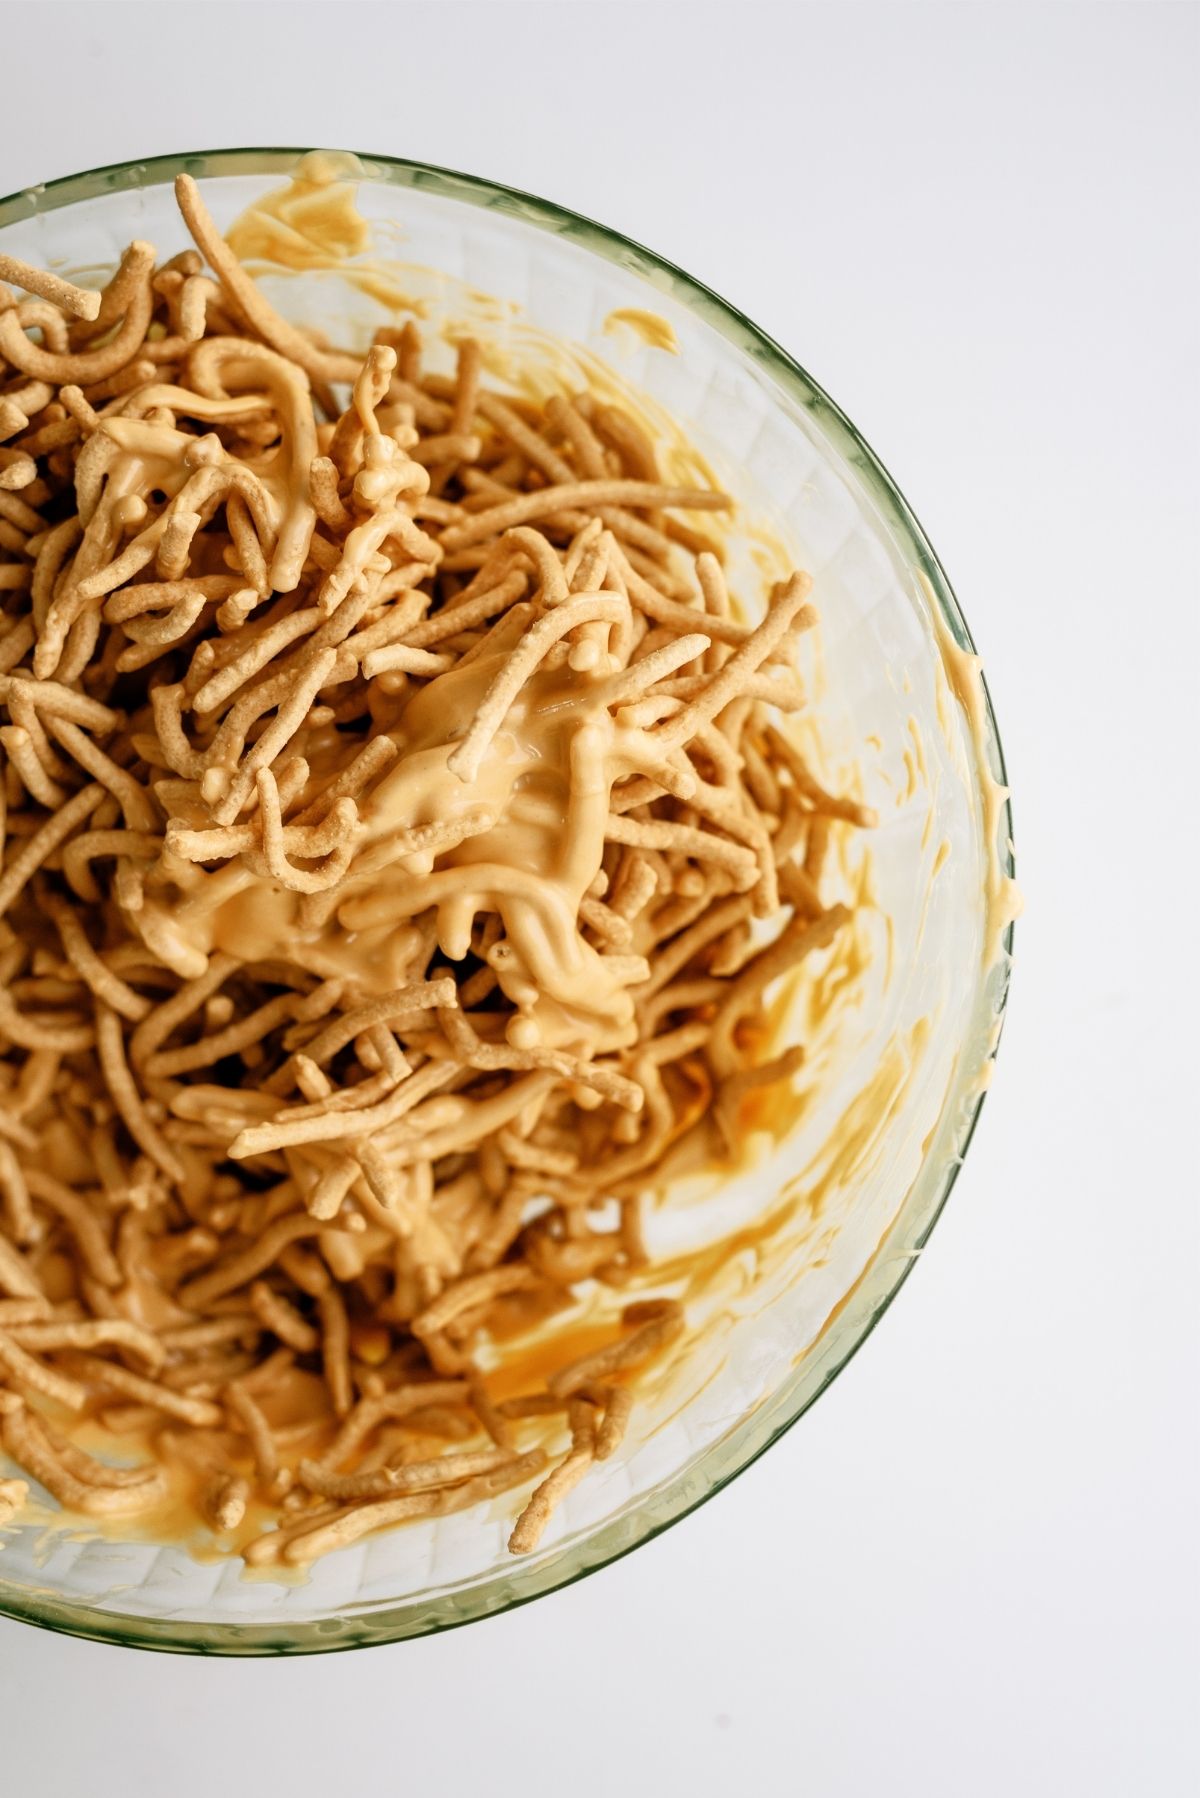 Chow mein noodles mixed in with the butterscotch mixture